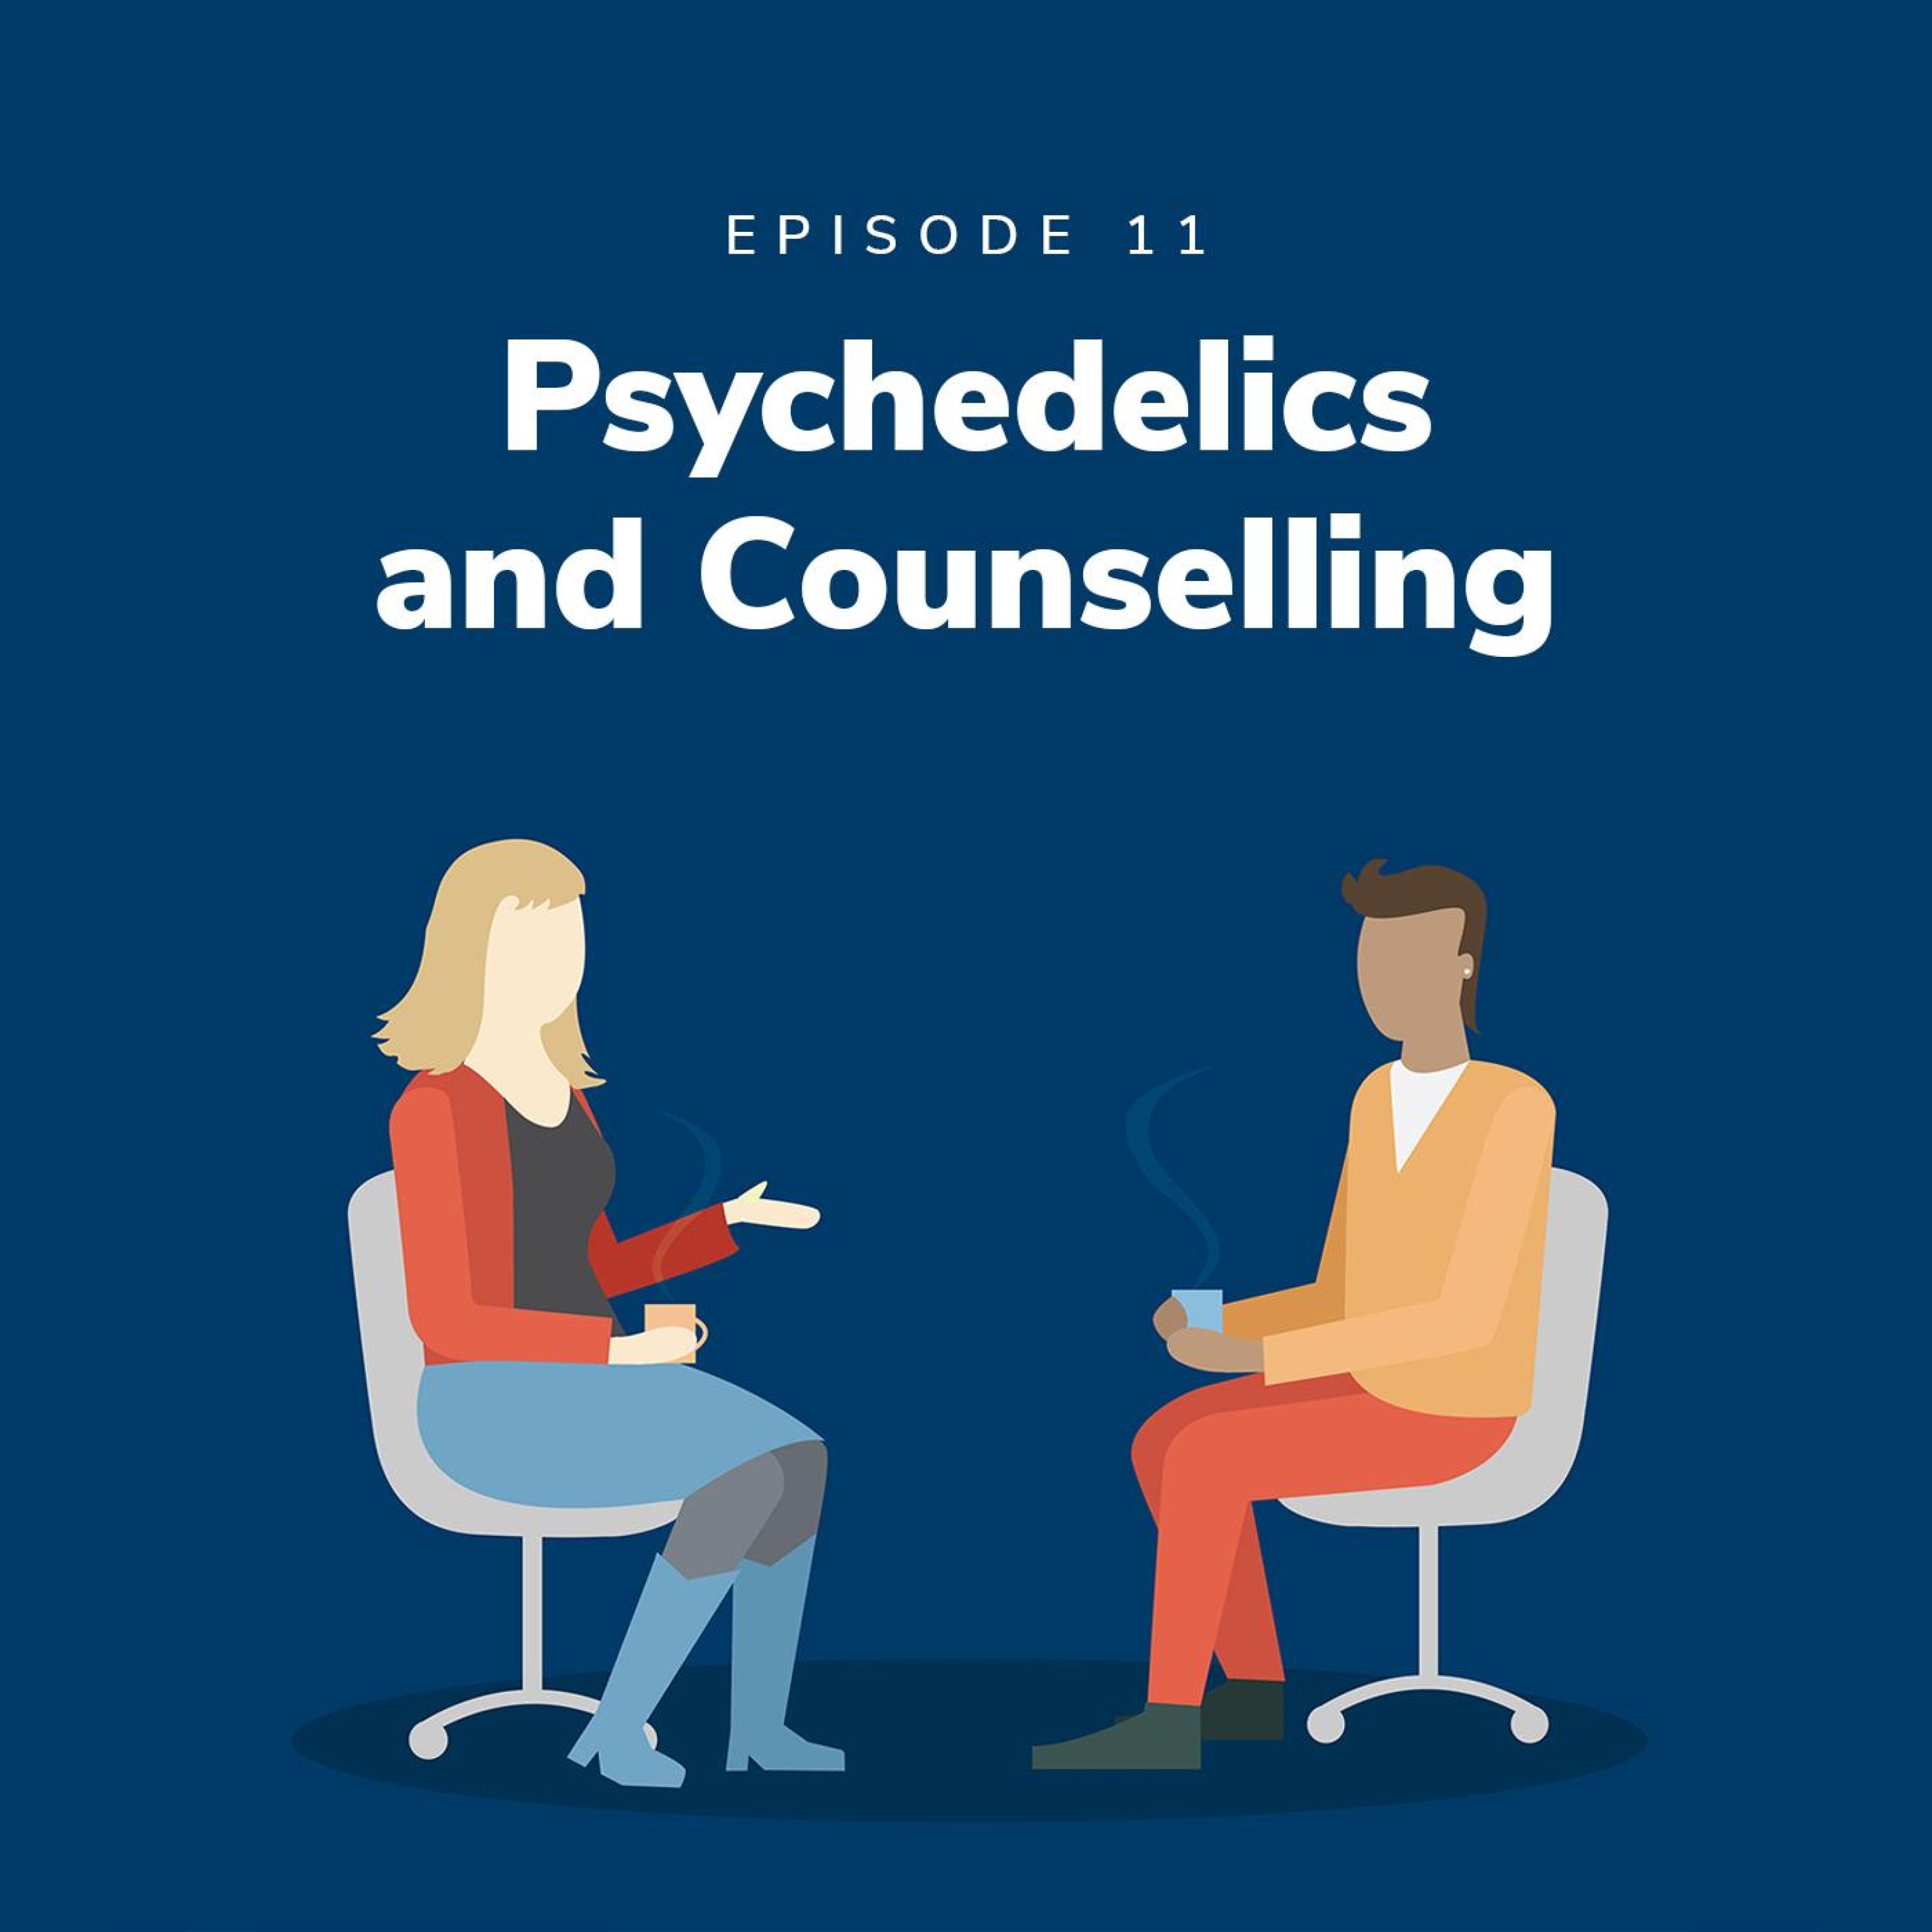 Psychedelics and Counselling